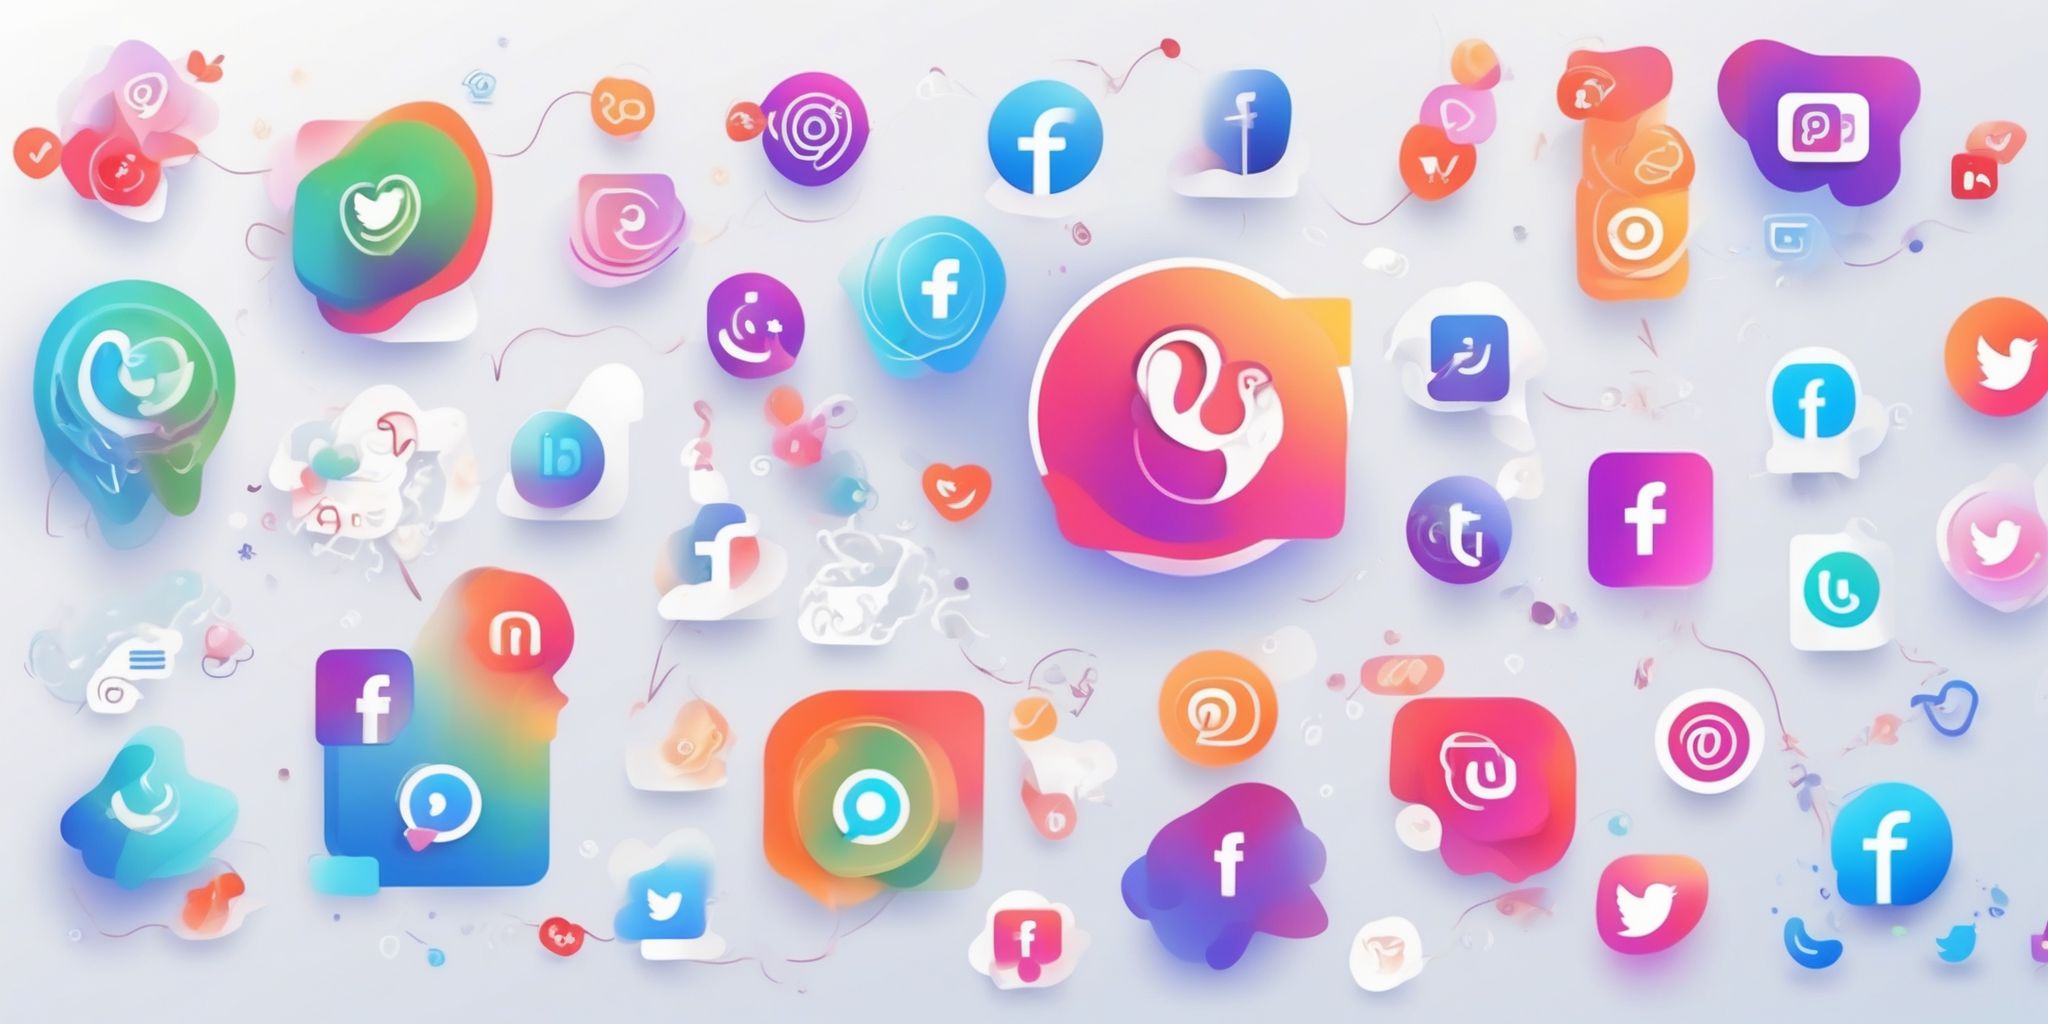 social media in illustration style with gradients and white background